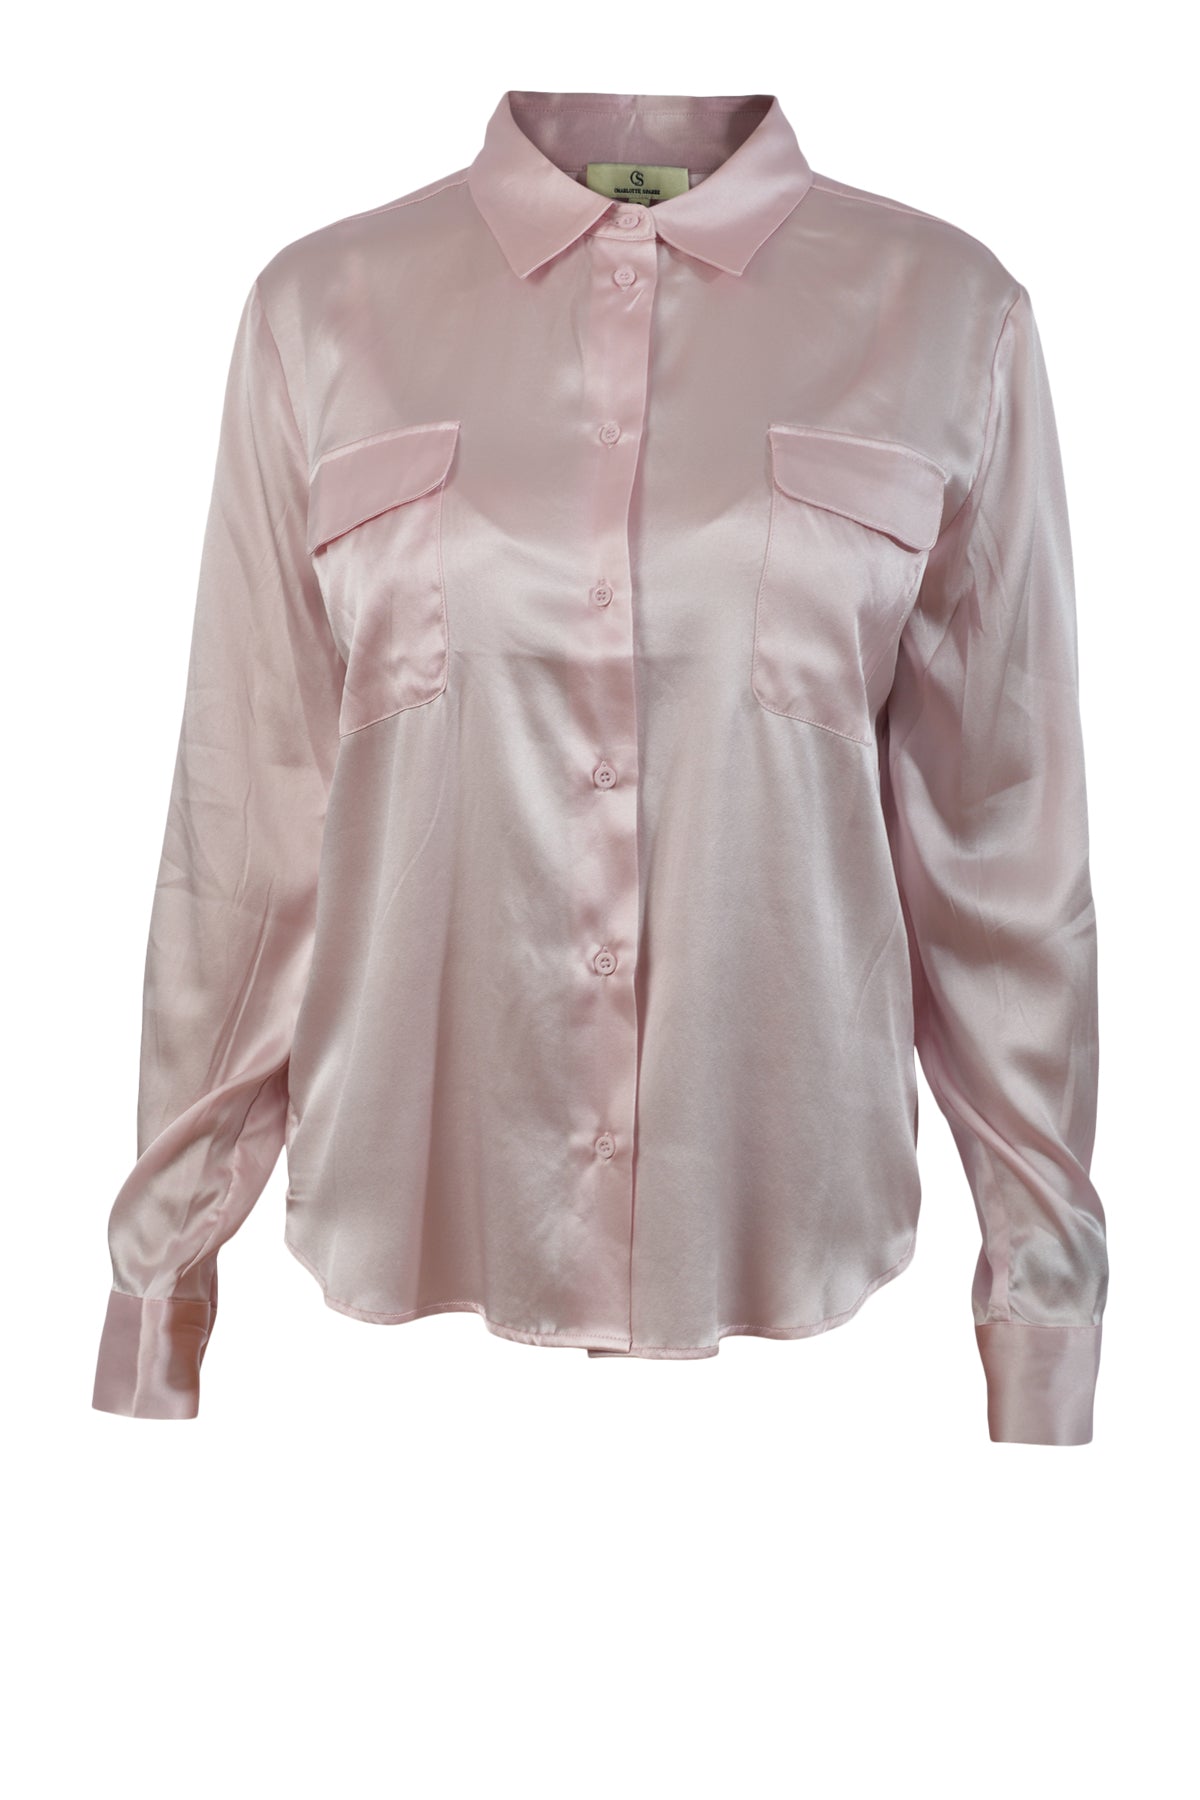 Charlotte Sparre Classic Shirt 2622 Solid, Rose